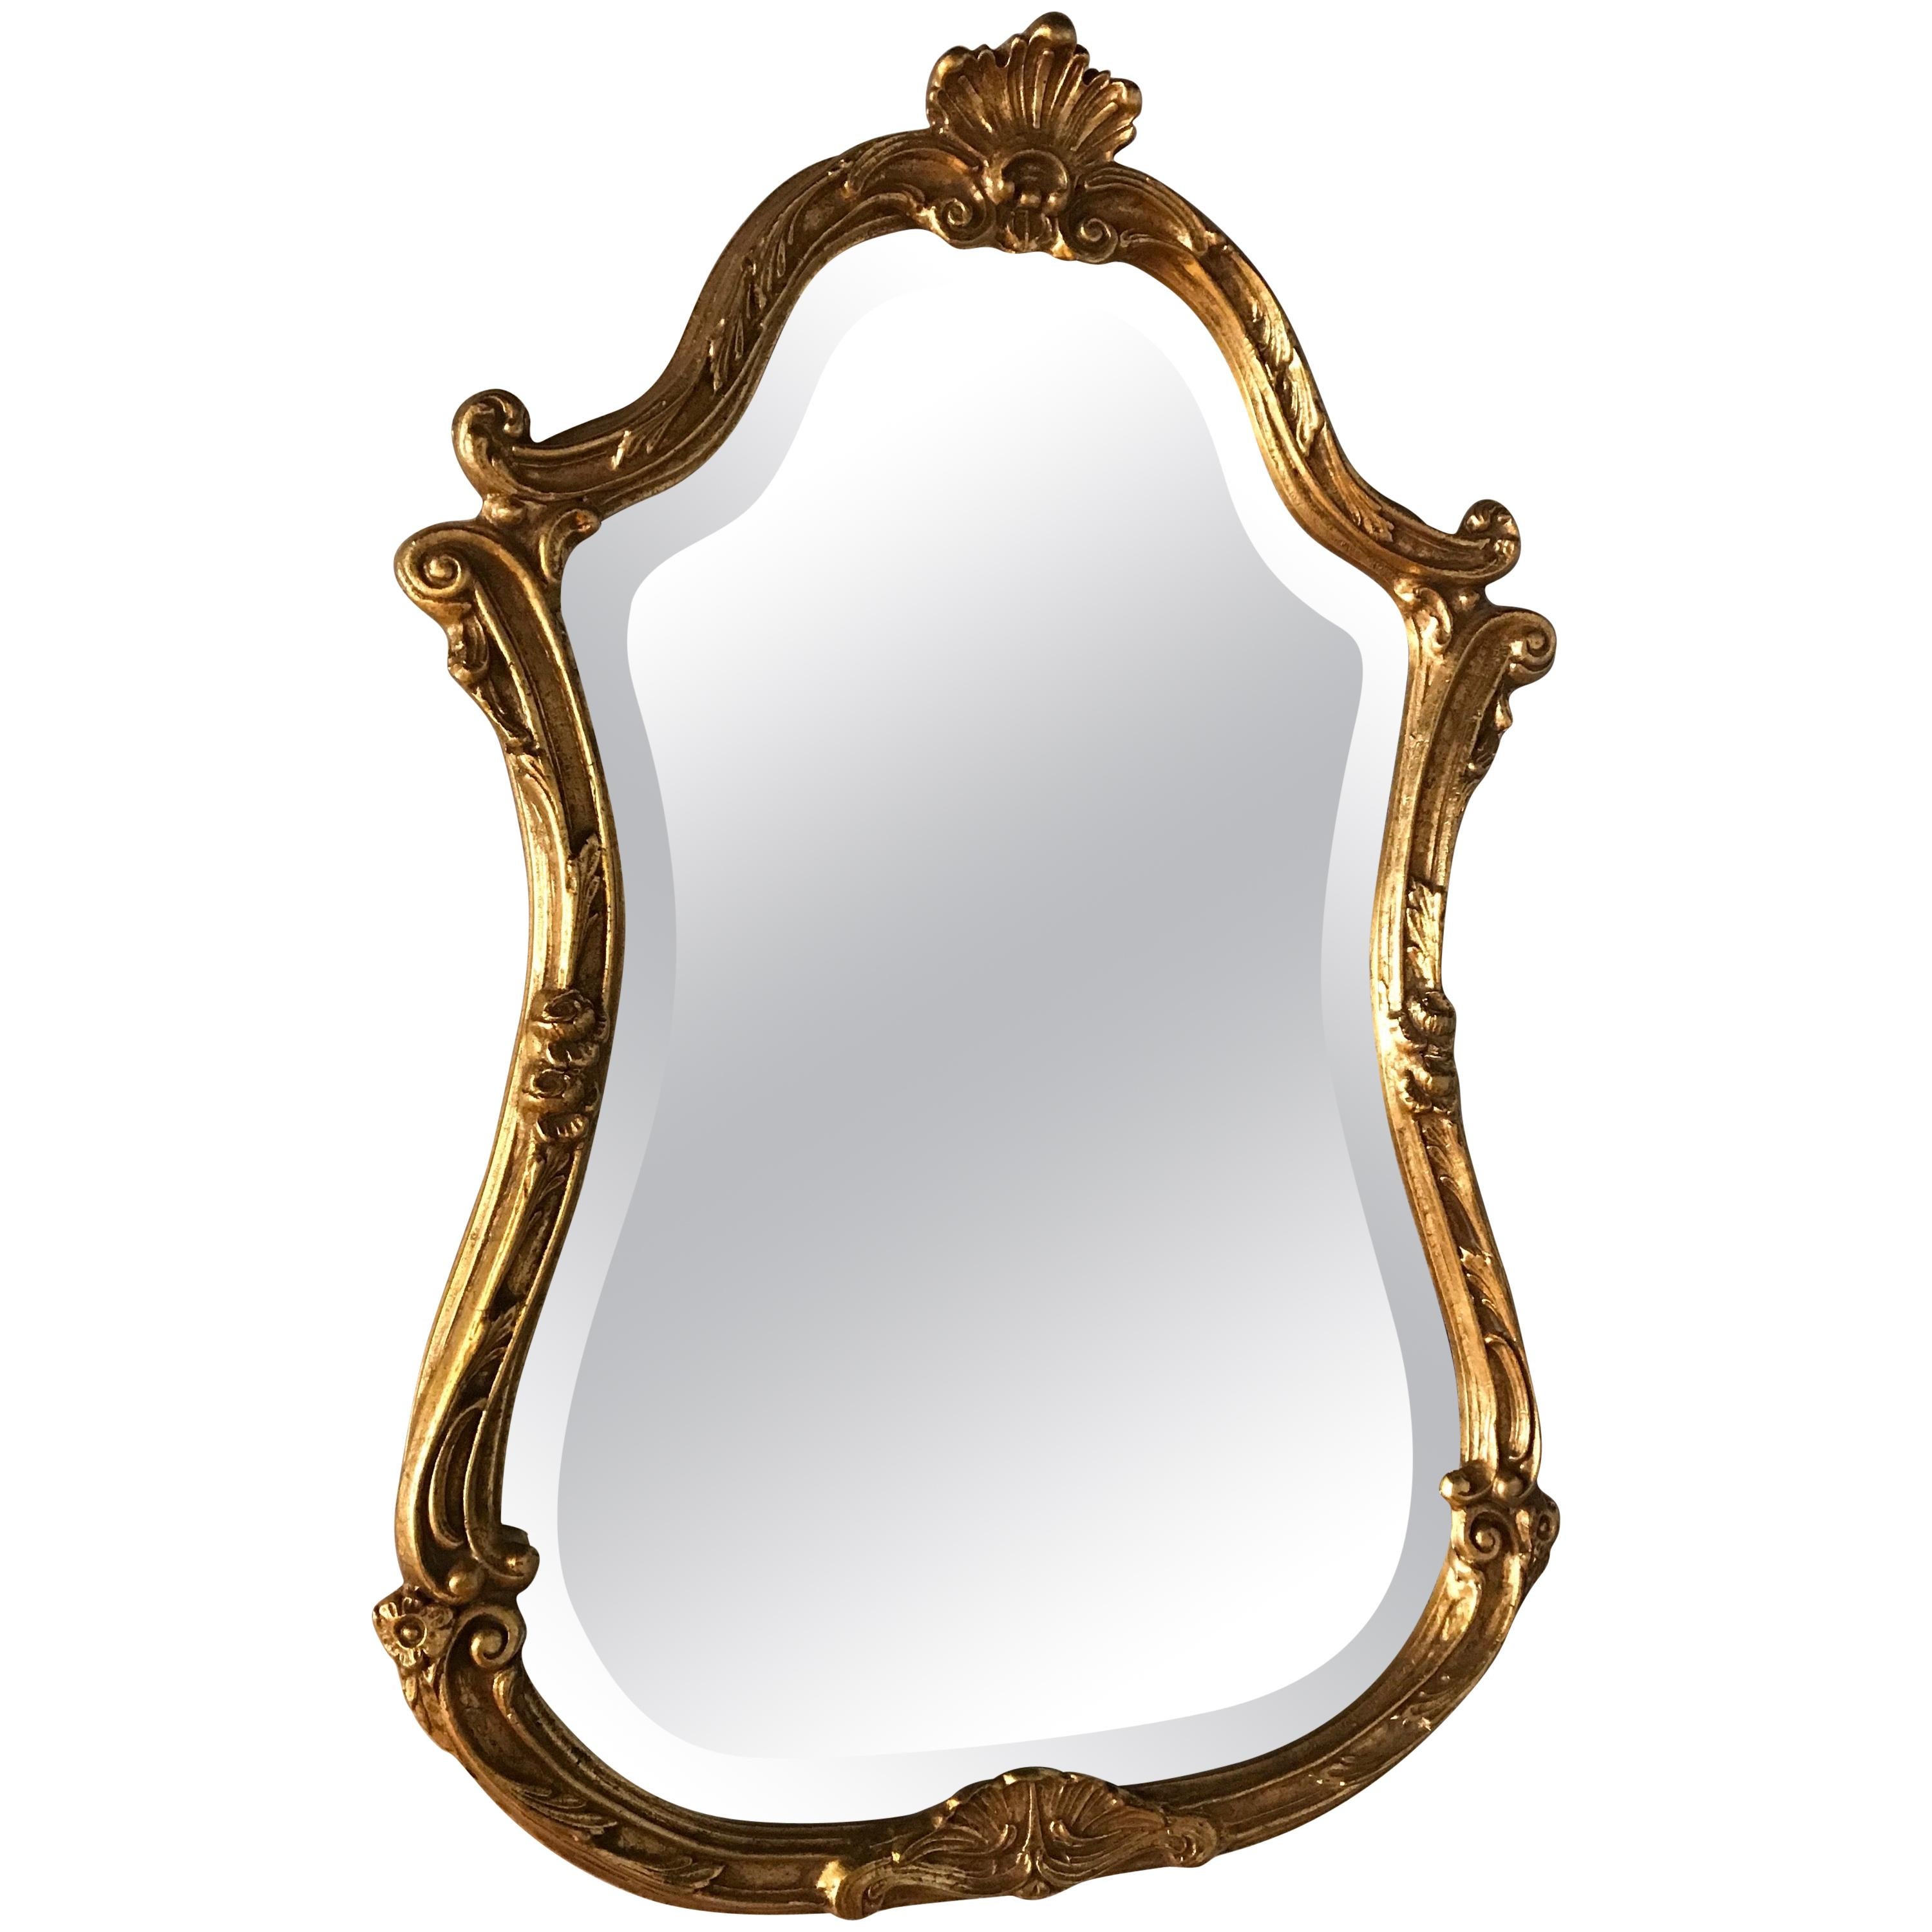 Italian Giltwood Mirror Topped with a Small Shell by Decorative Arts